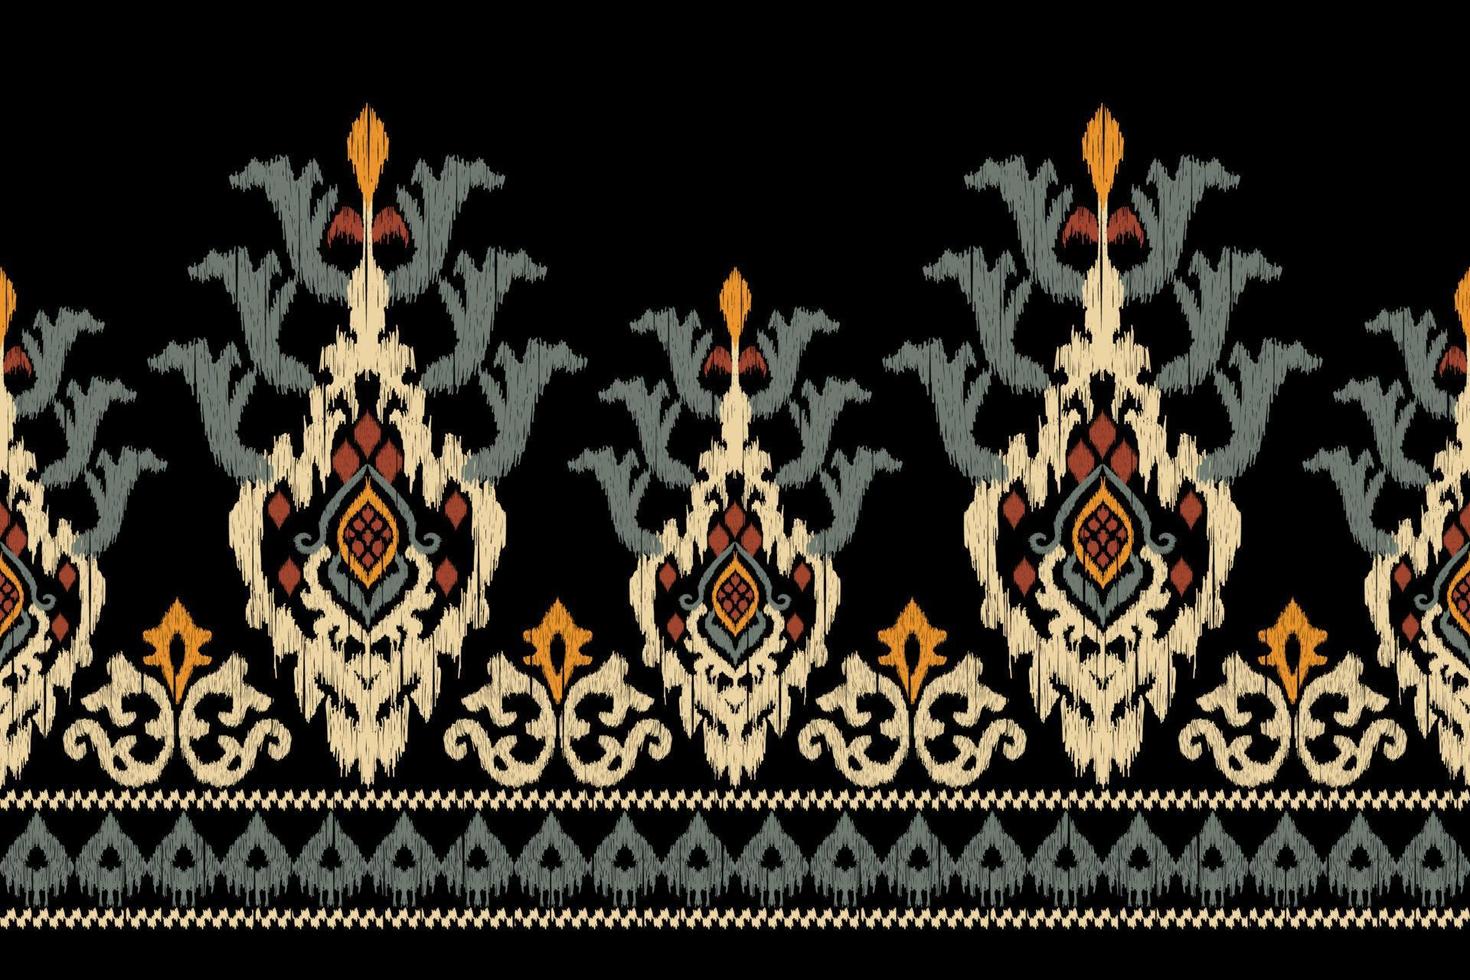 Ikat floral paisley embroidery on black background.geometric ethnic oriental pattern traditional.Aztec style abstract vector illustration.design for texture,fabric,clothing,wrapping,decoration,sarong.